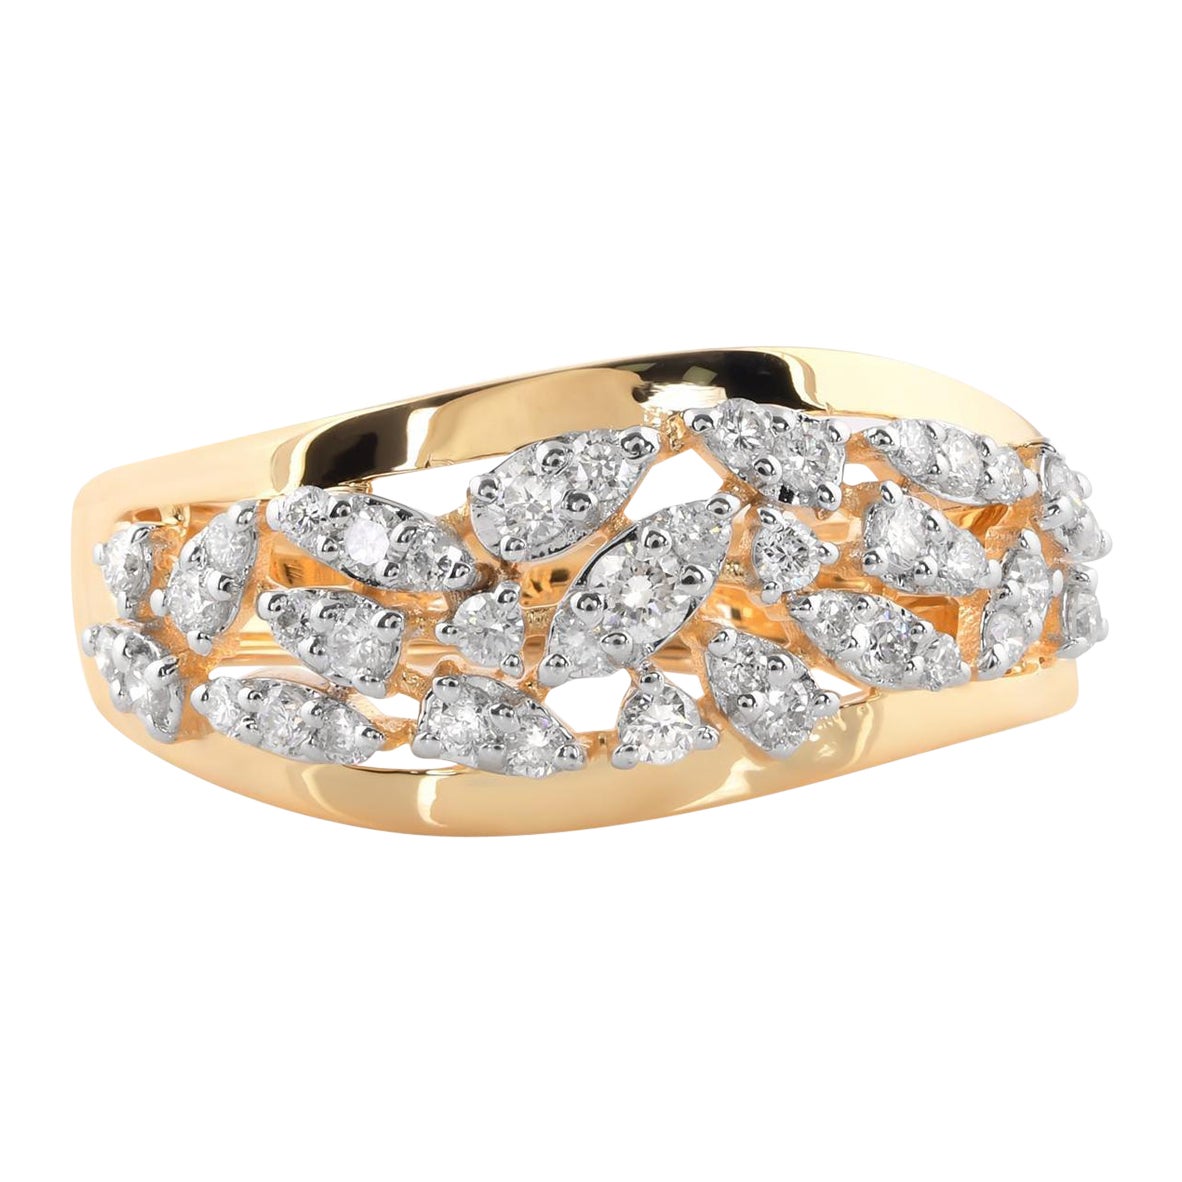 Natural SI Clarity HI Color Round Diamond Ring 14 Karat Yellow Gold Fine Jewelry